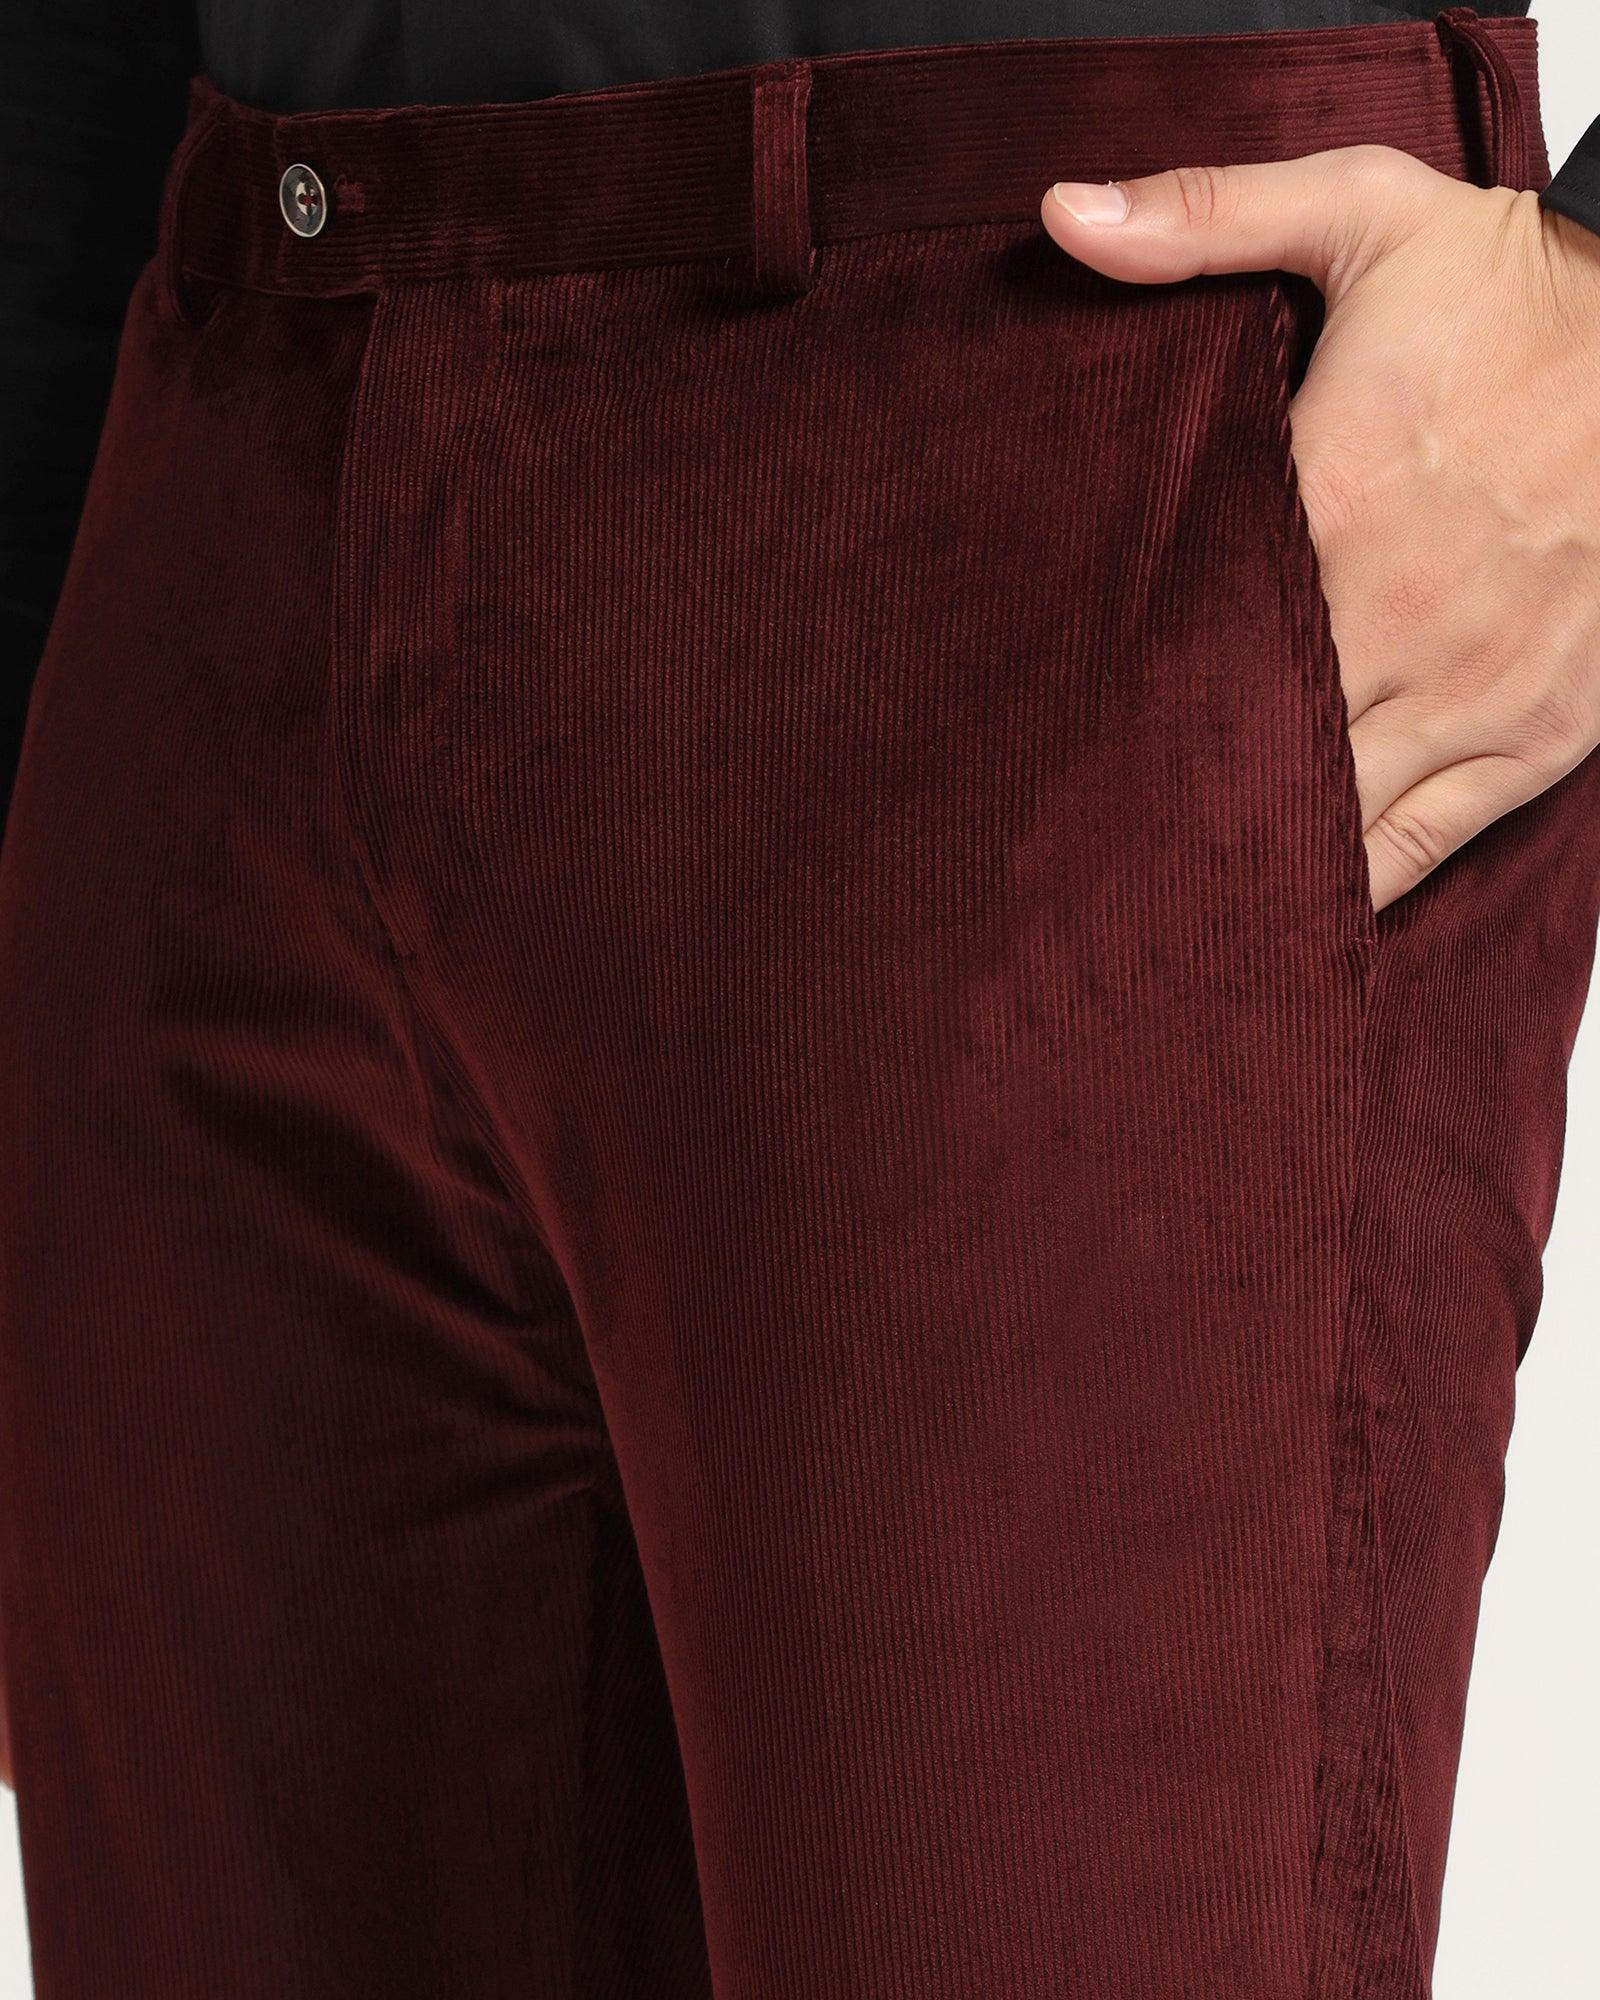 DQUARED 2 Men's Trousers Burgundy Pants Sz 52 (34-36) Made In Italy | eBay